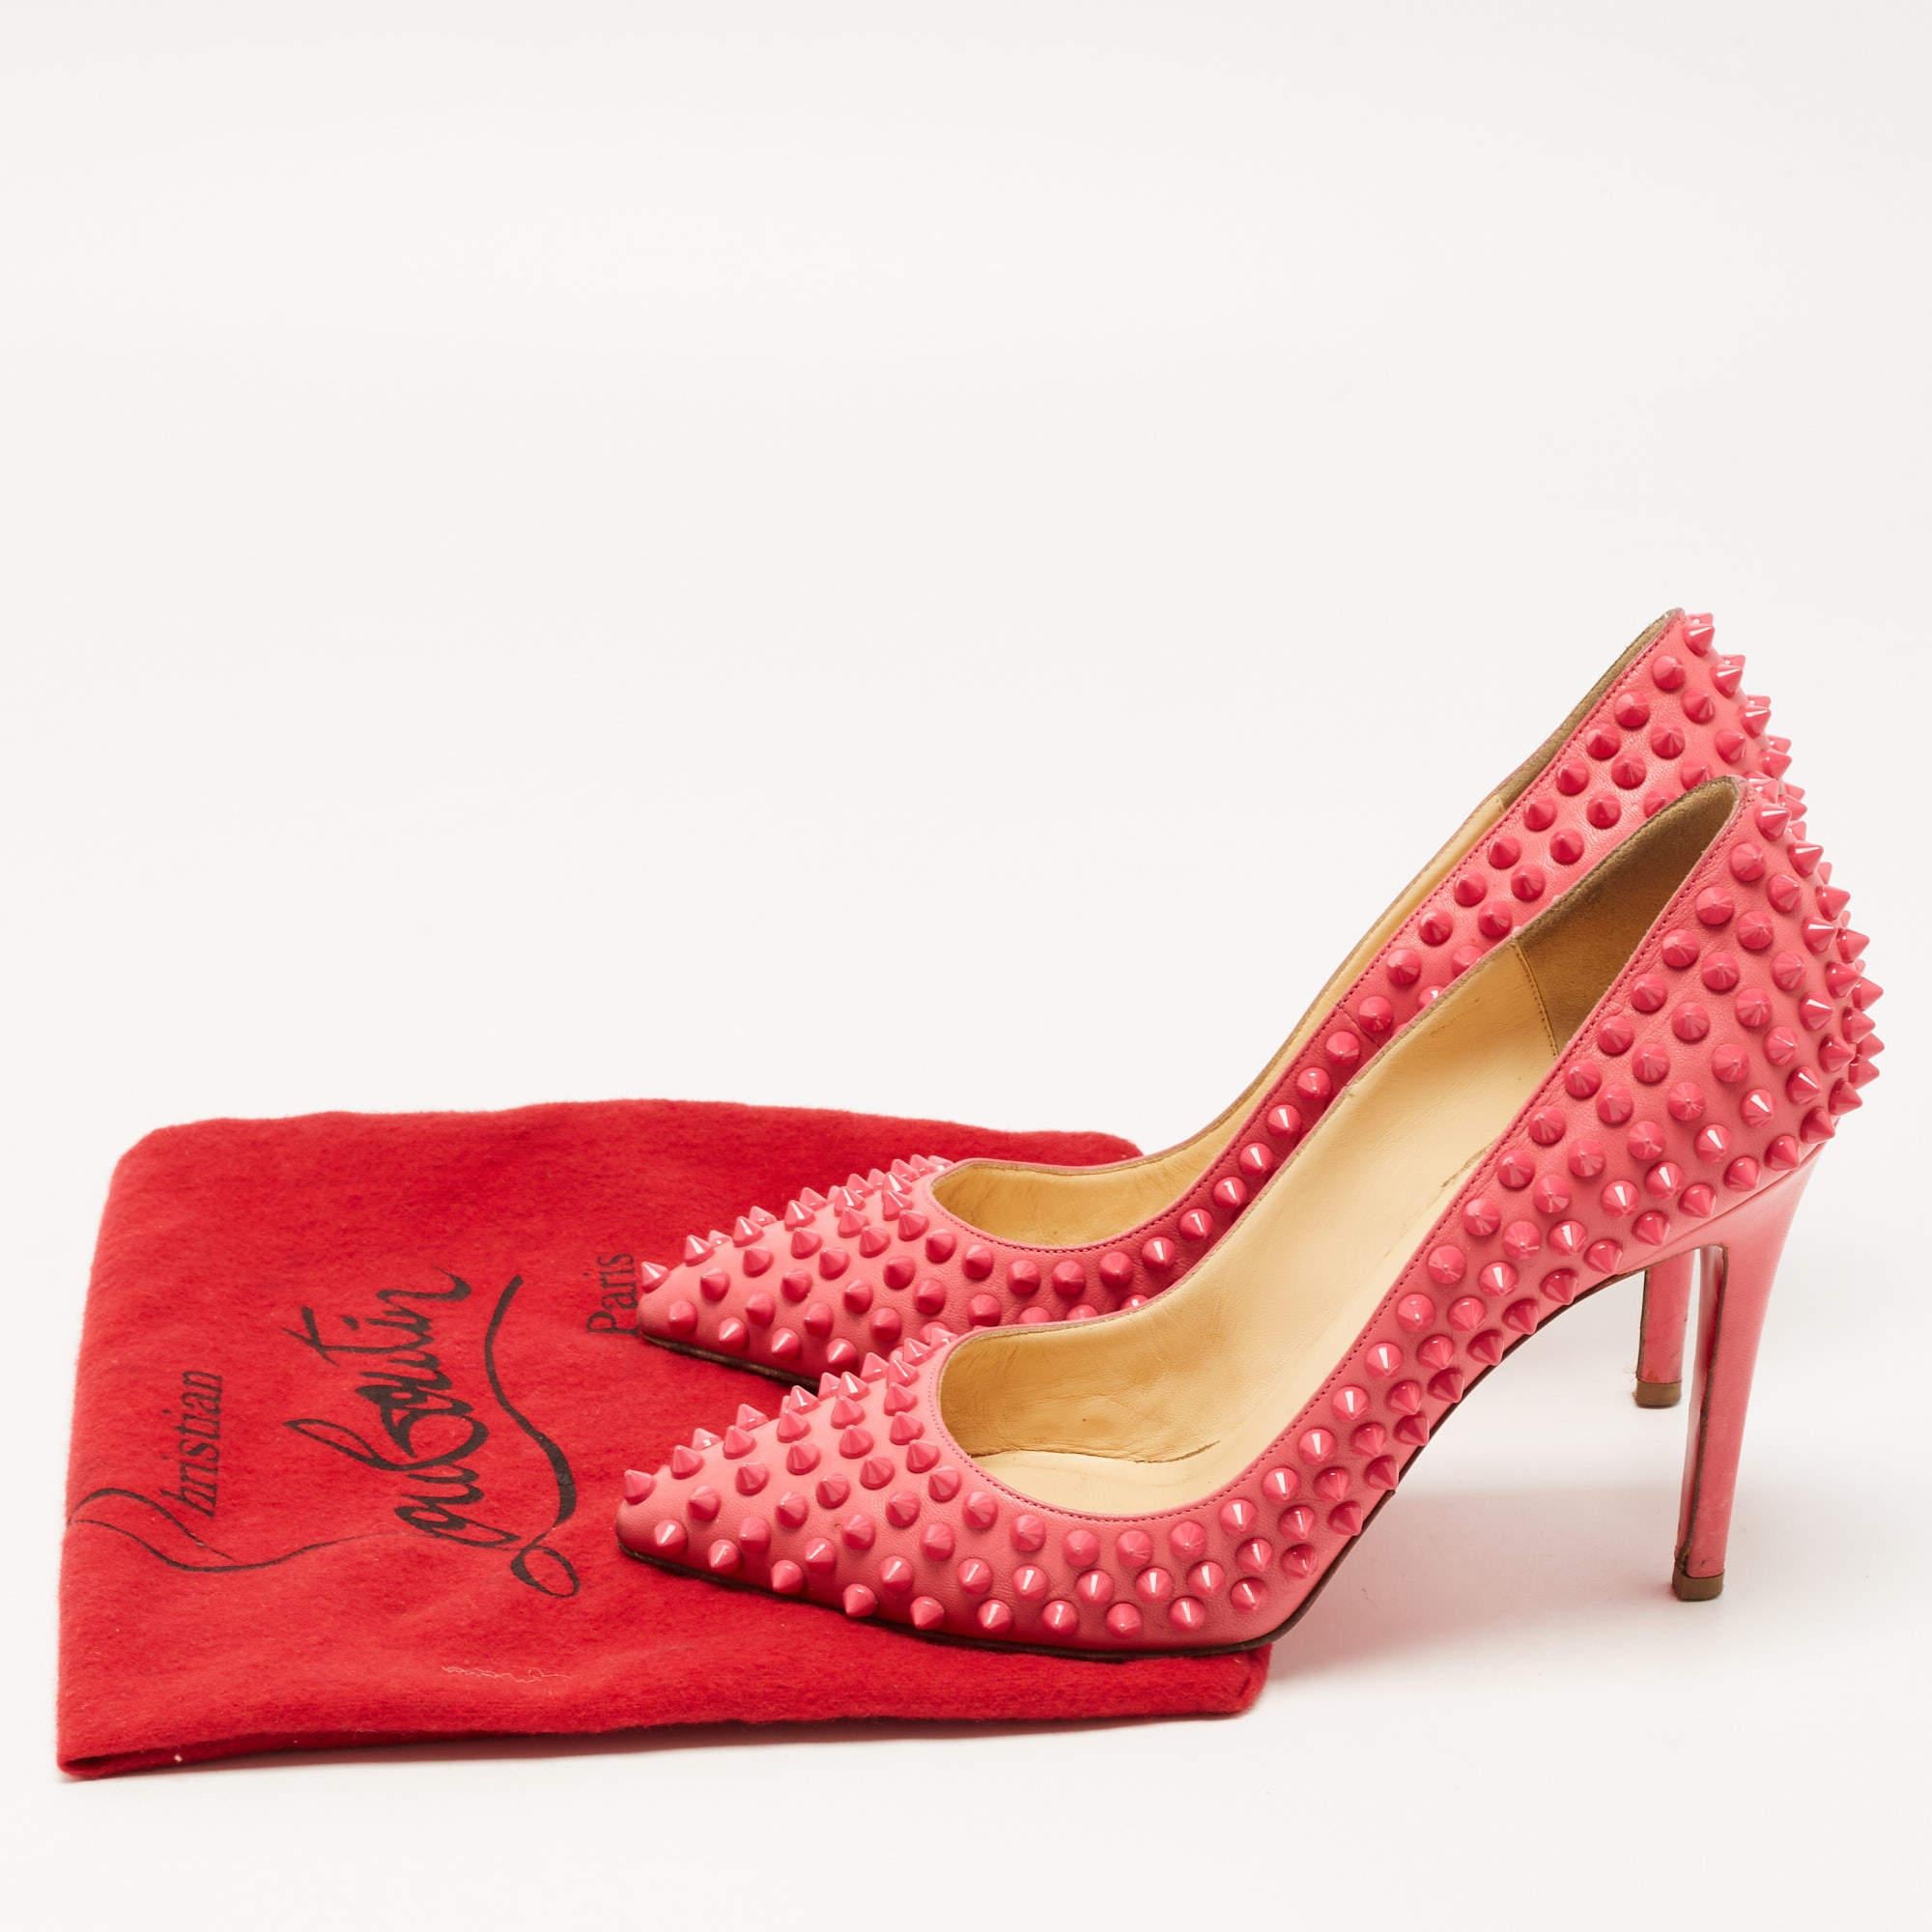 Christian Louboutin Pink Leather Pigalle Spikes Pumps Size 37 5